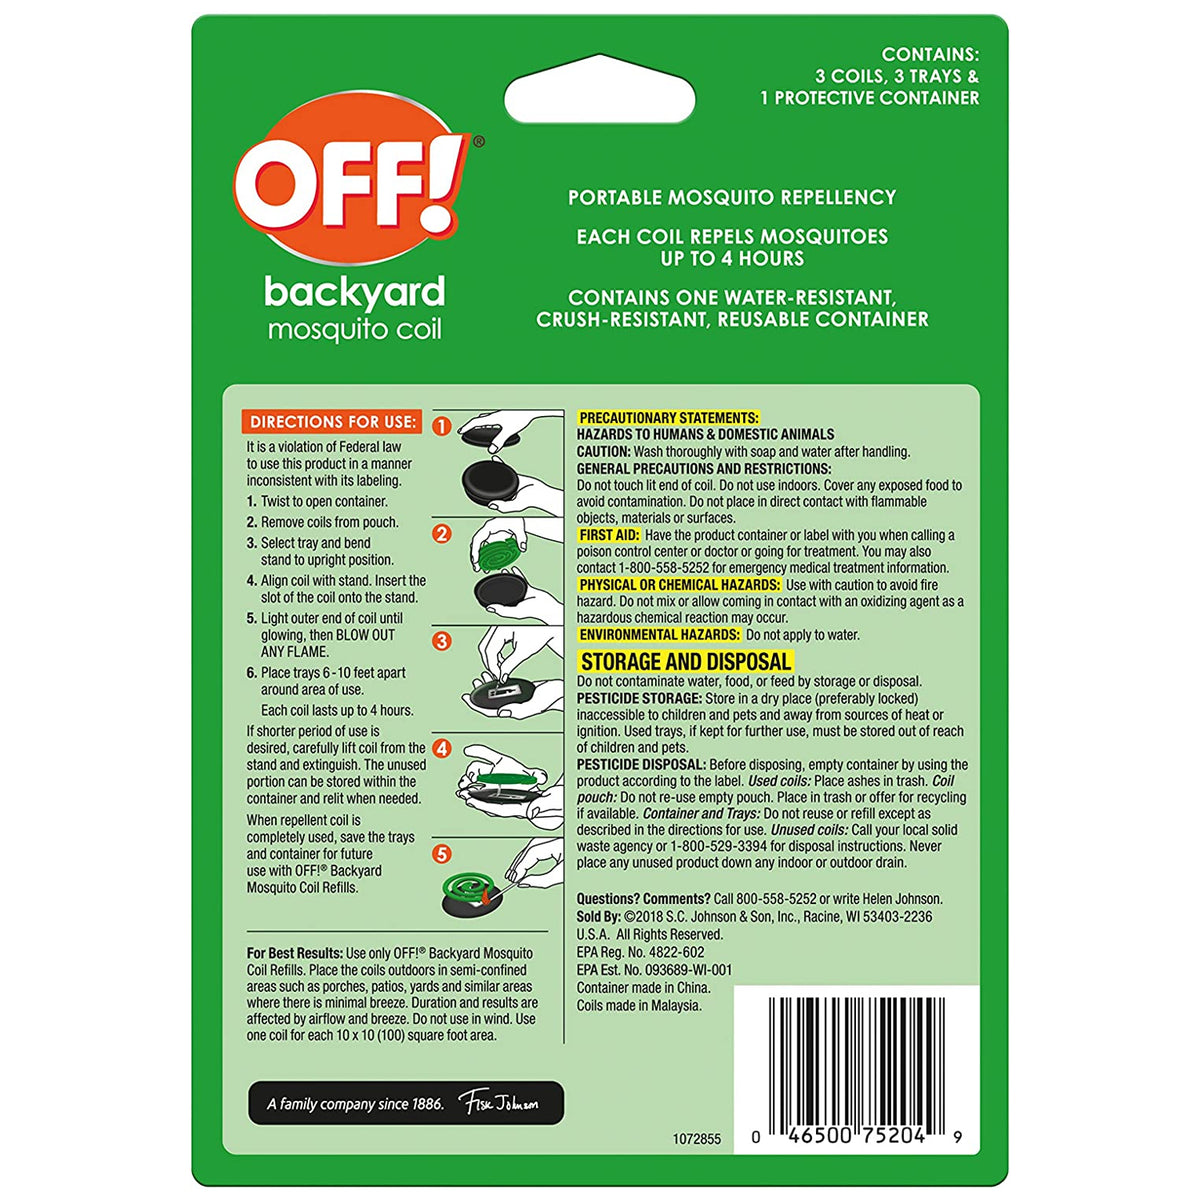 Off 75204 Backyard Mosquito Coil Starter, Repels Up to 4 Hours